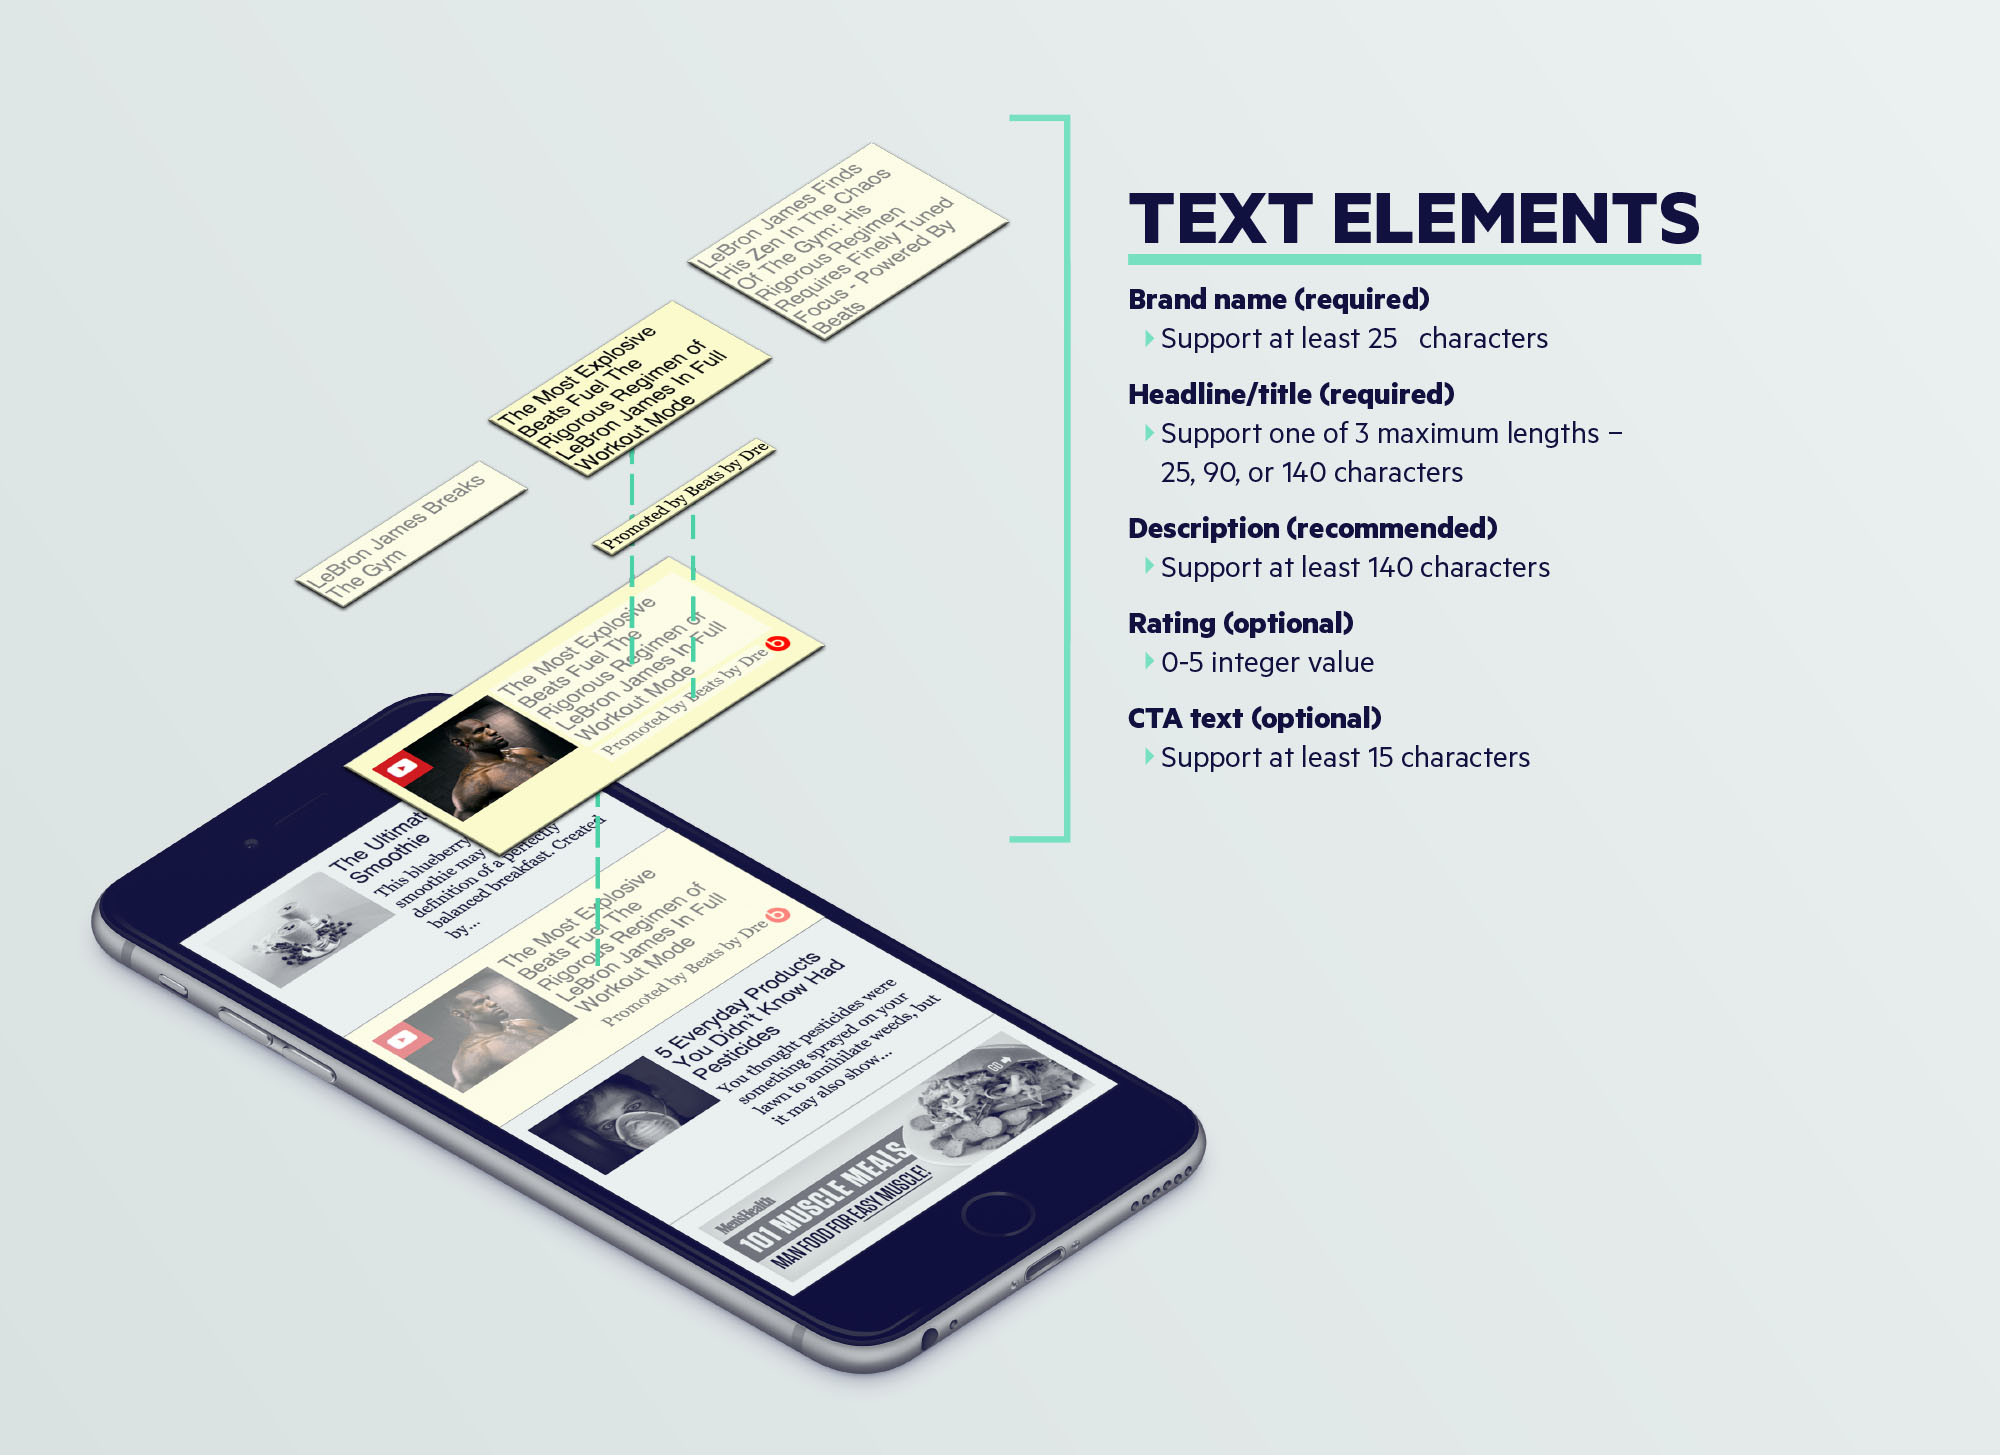 Text Elements Of OpenRTB 2.4 And Native 1.1